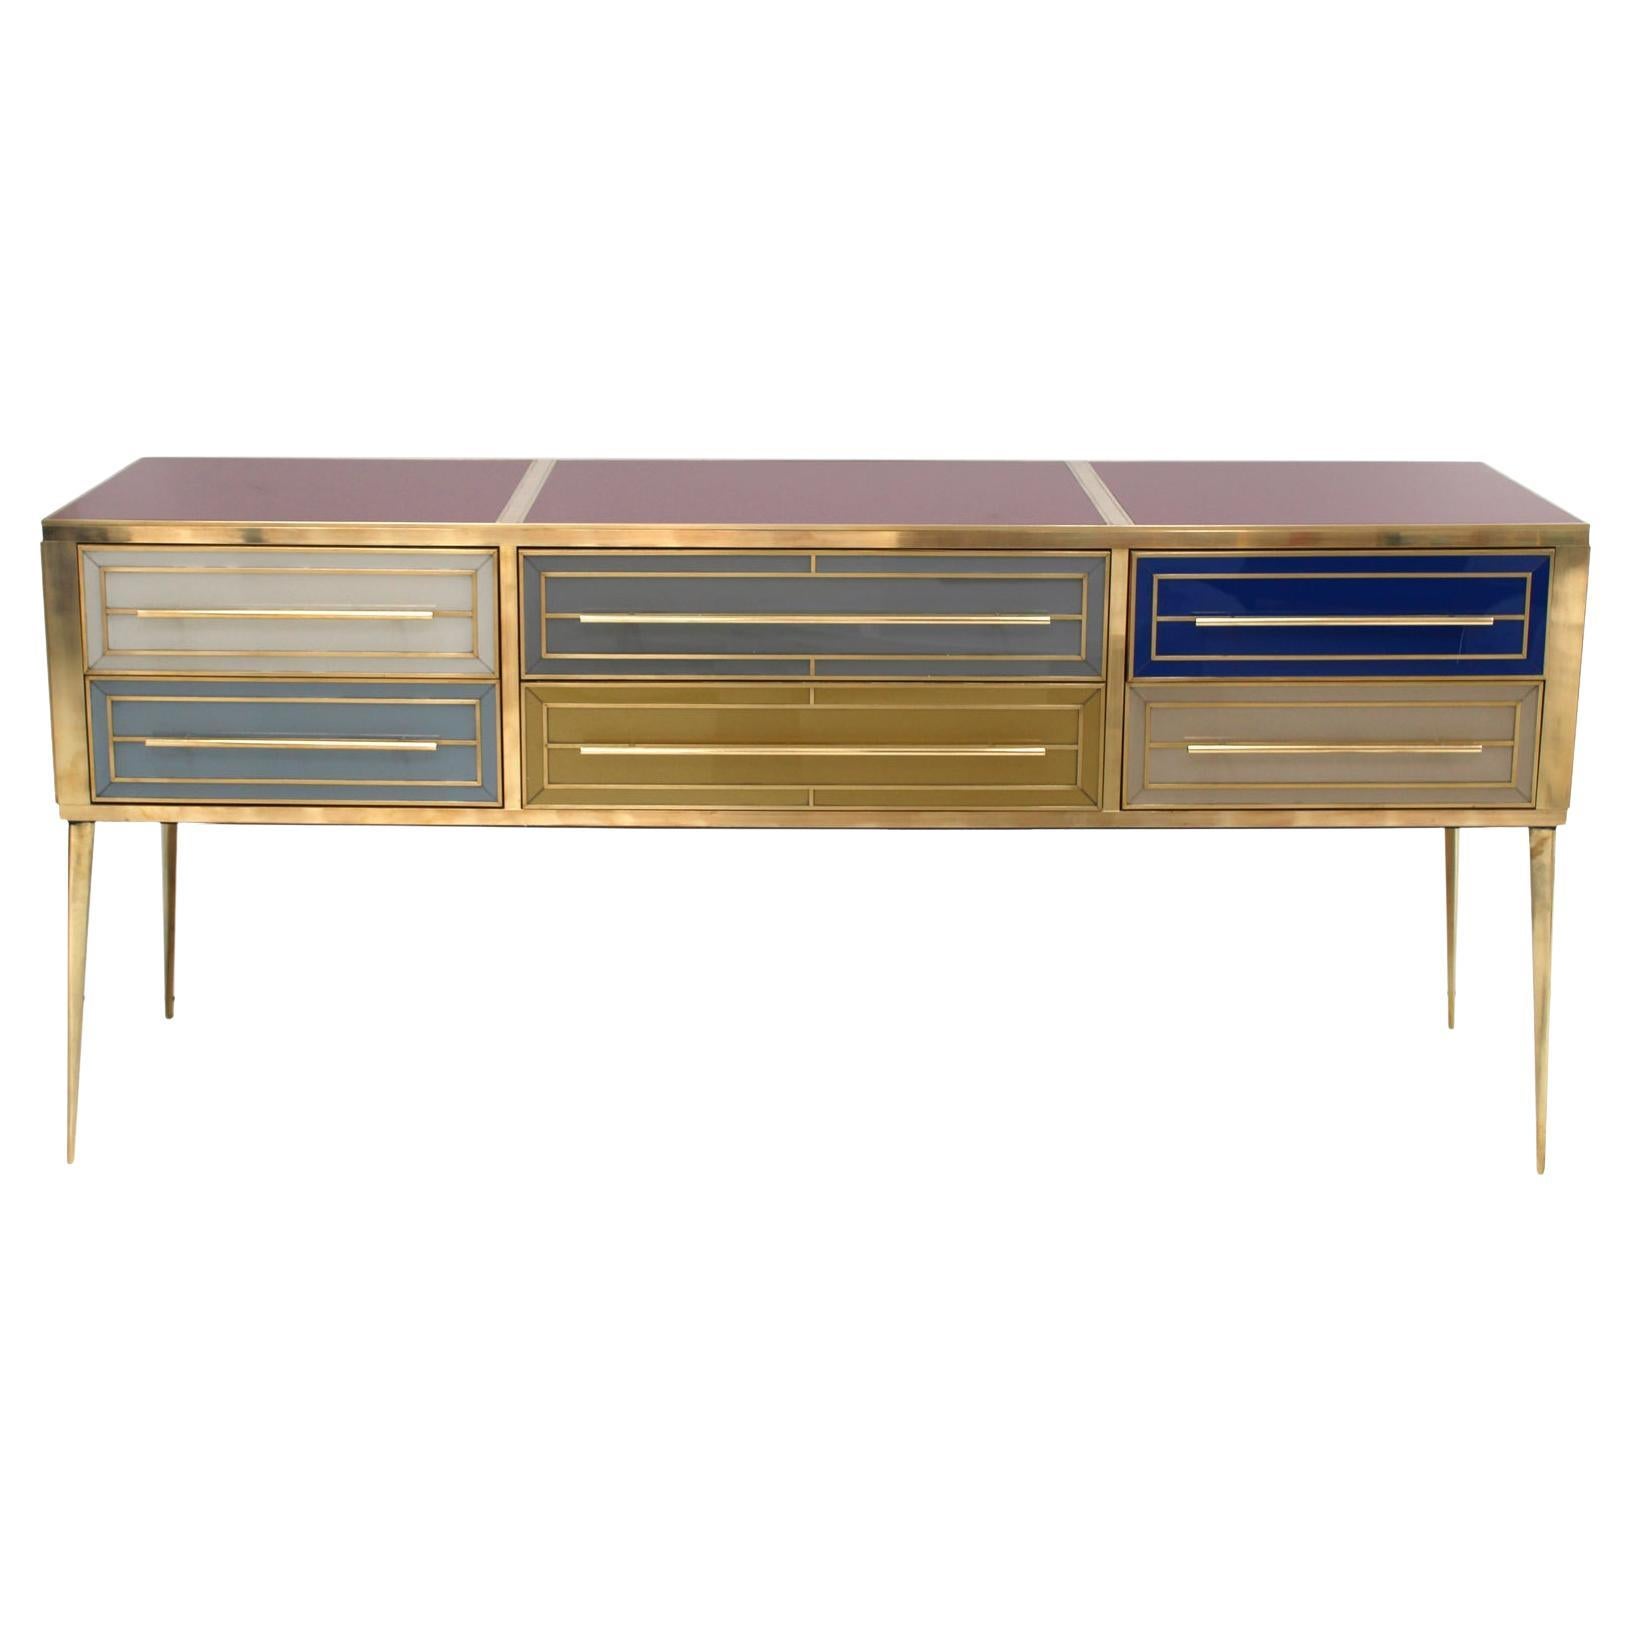 Midcentury Style Italian Sideboard Made of Wood and Covered with Colored Glass